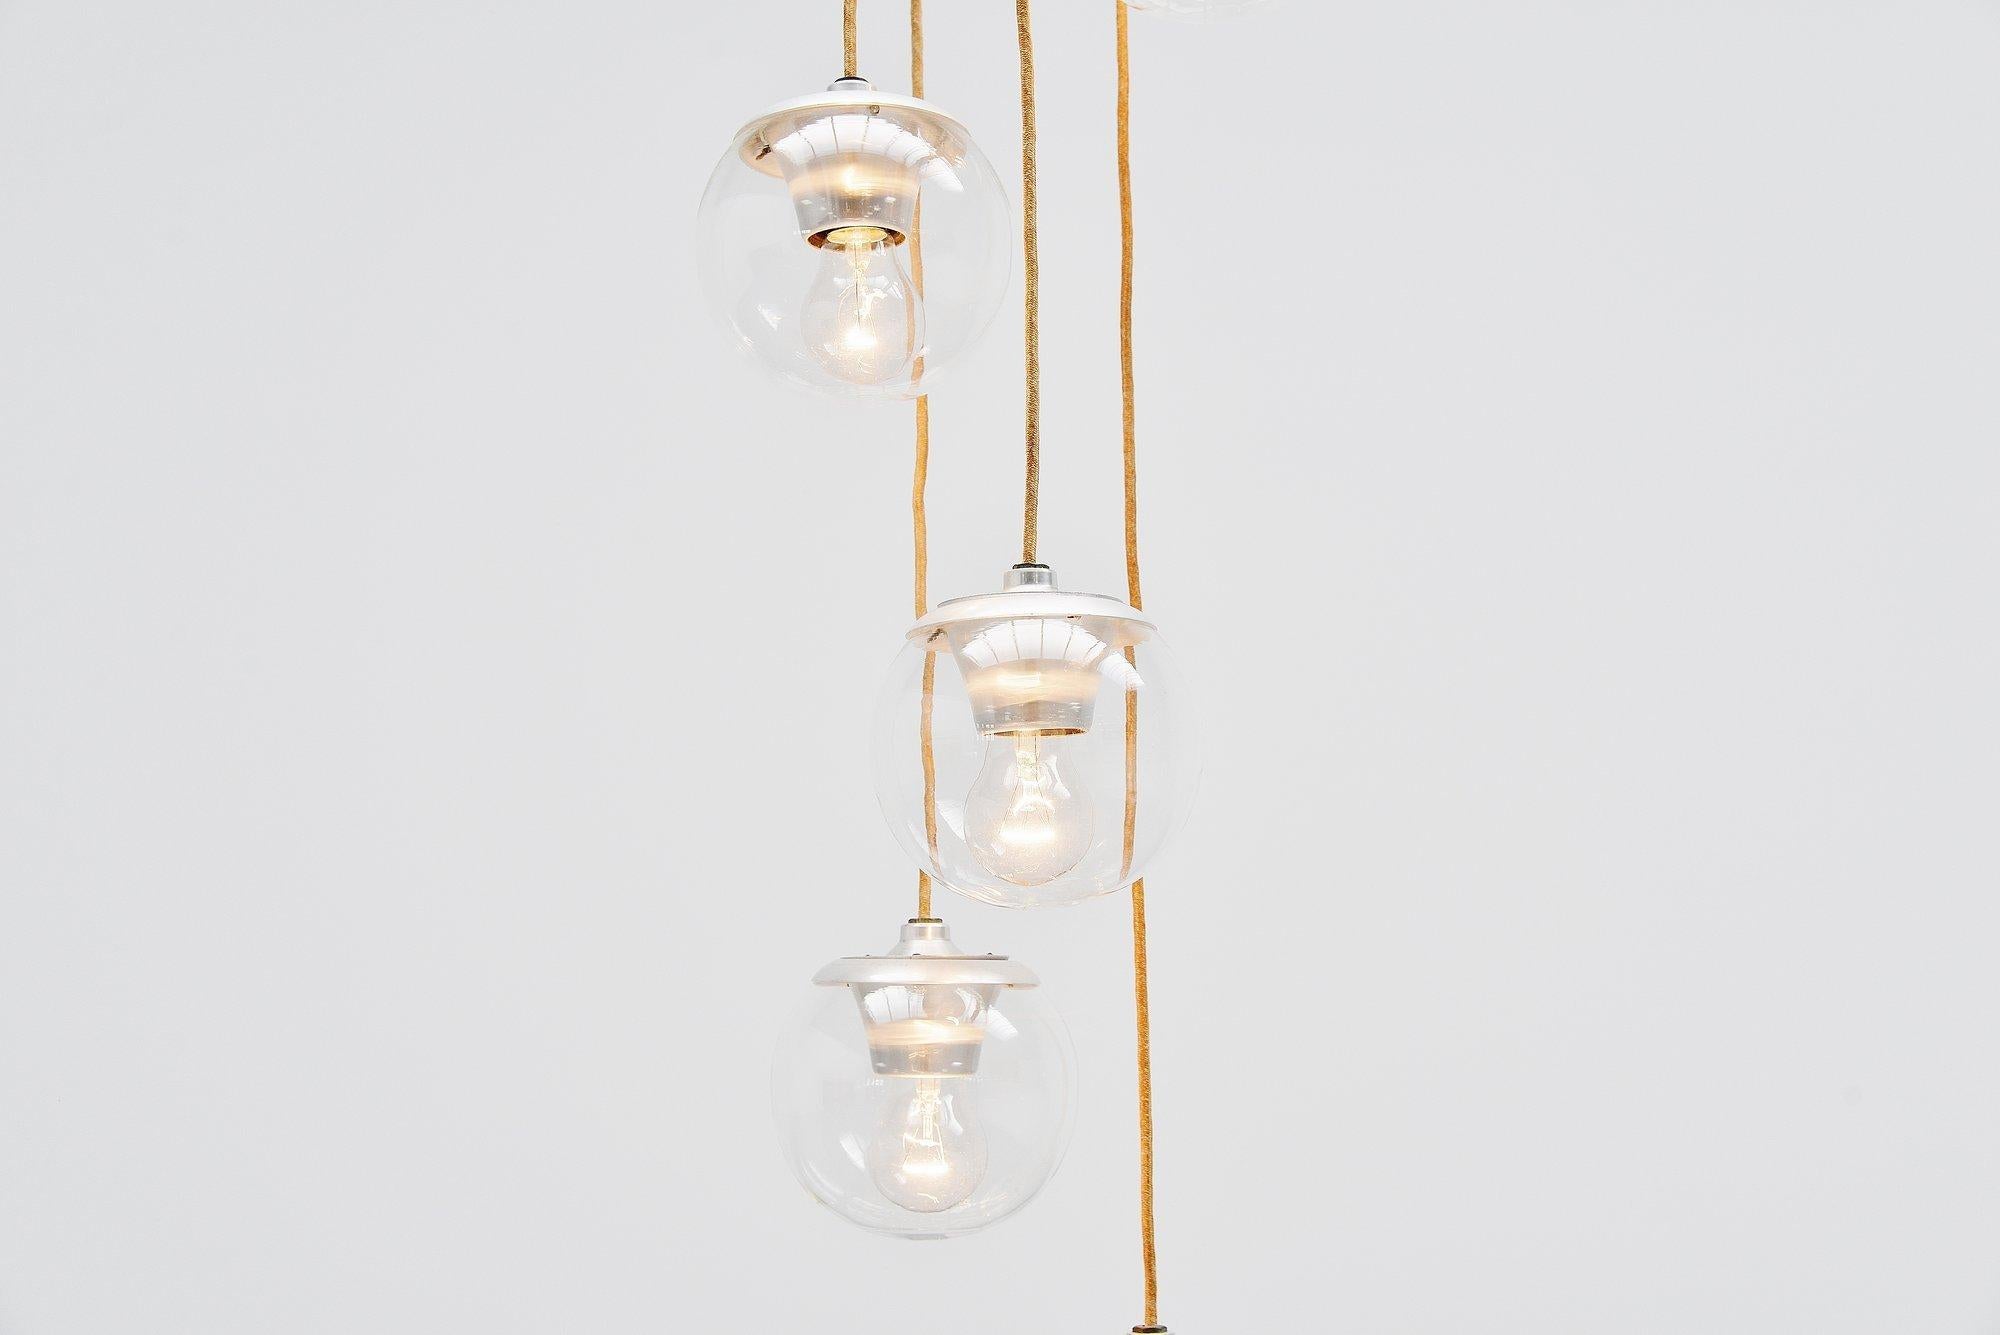 Very nice chandelier model 2095/5 designed by Gino Sarfatti, manufactured by Arteluce, Italy, 1958. This nice and impressive chandelier has a rare white ceiling plate and original white dust wiring. The aluminum ceiling plate makes sure the bulbs